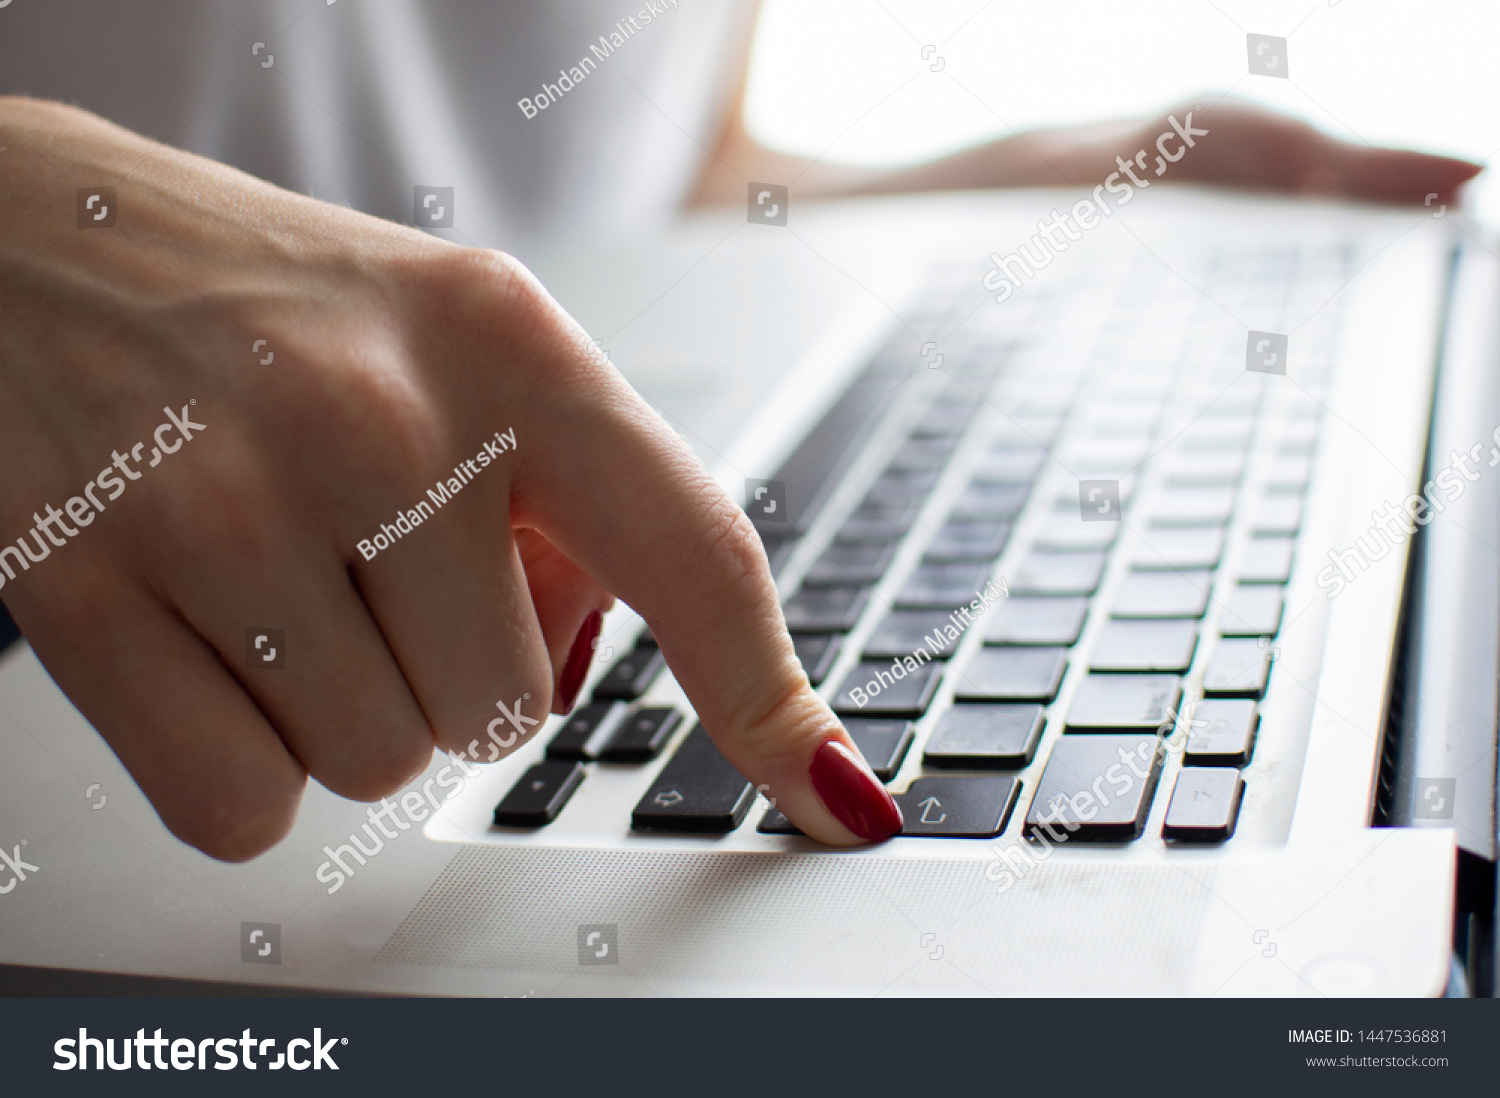 girl's hand typing on a laptop keyboard, she presses Enter key, moment of confirmation on the computer, close-up #1447536881